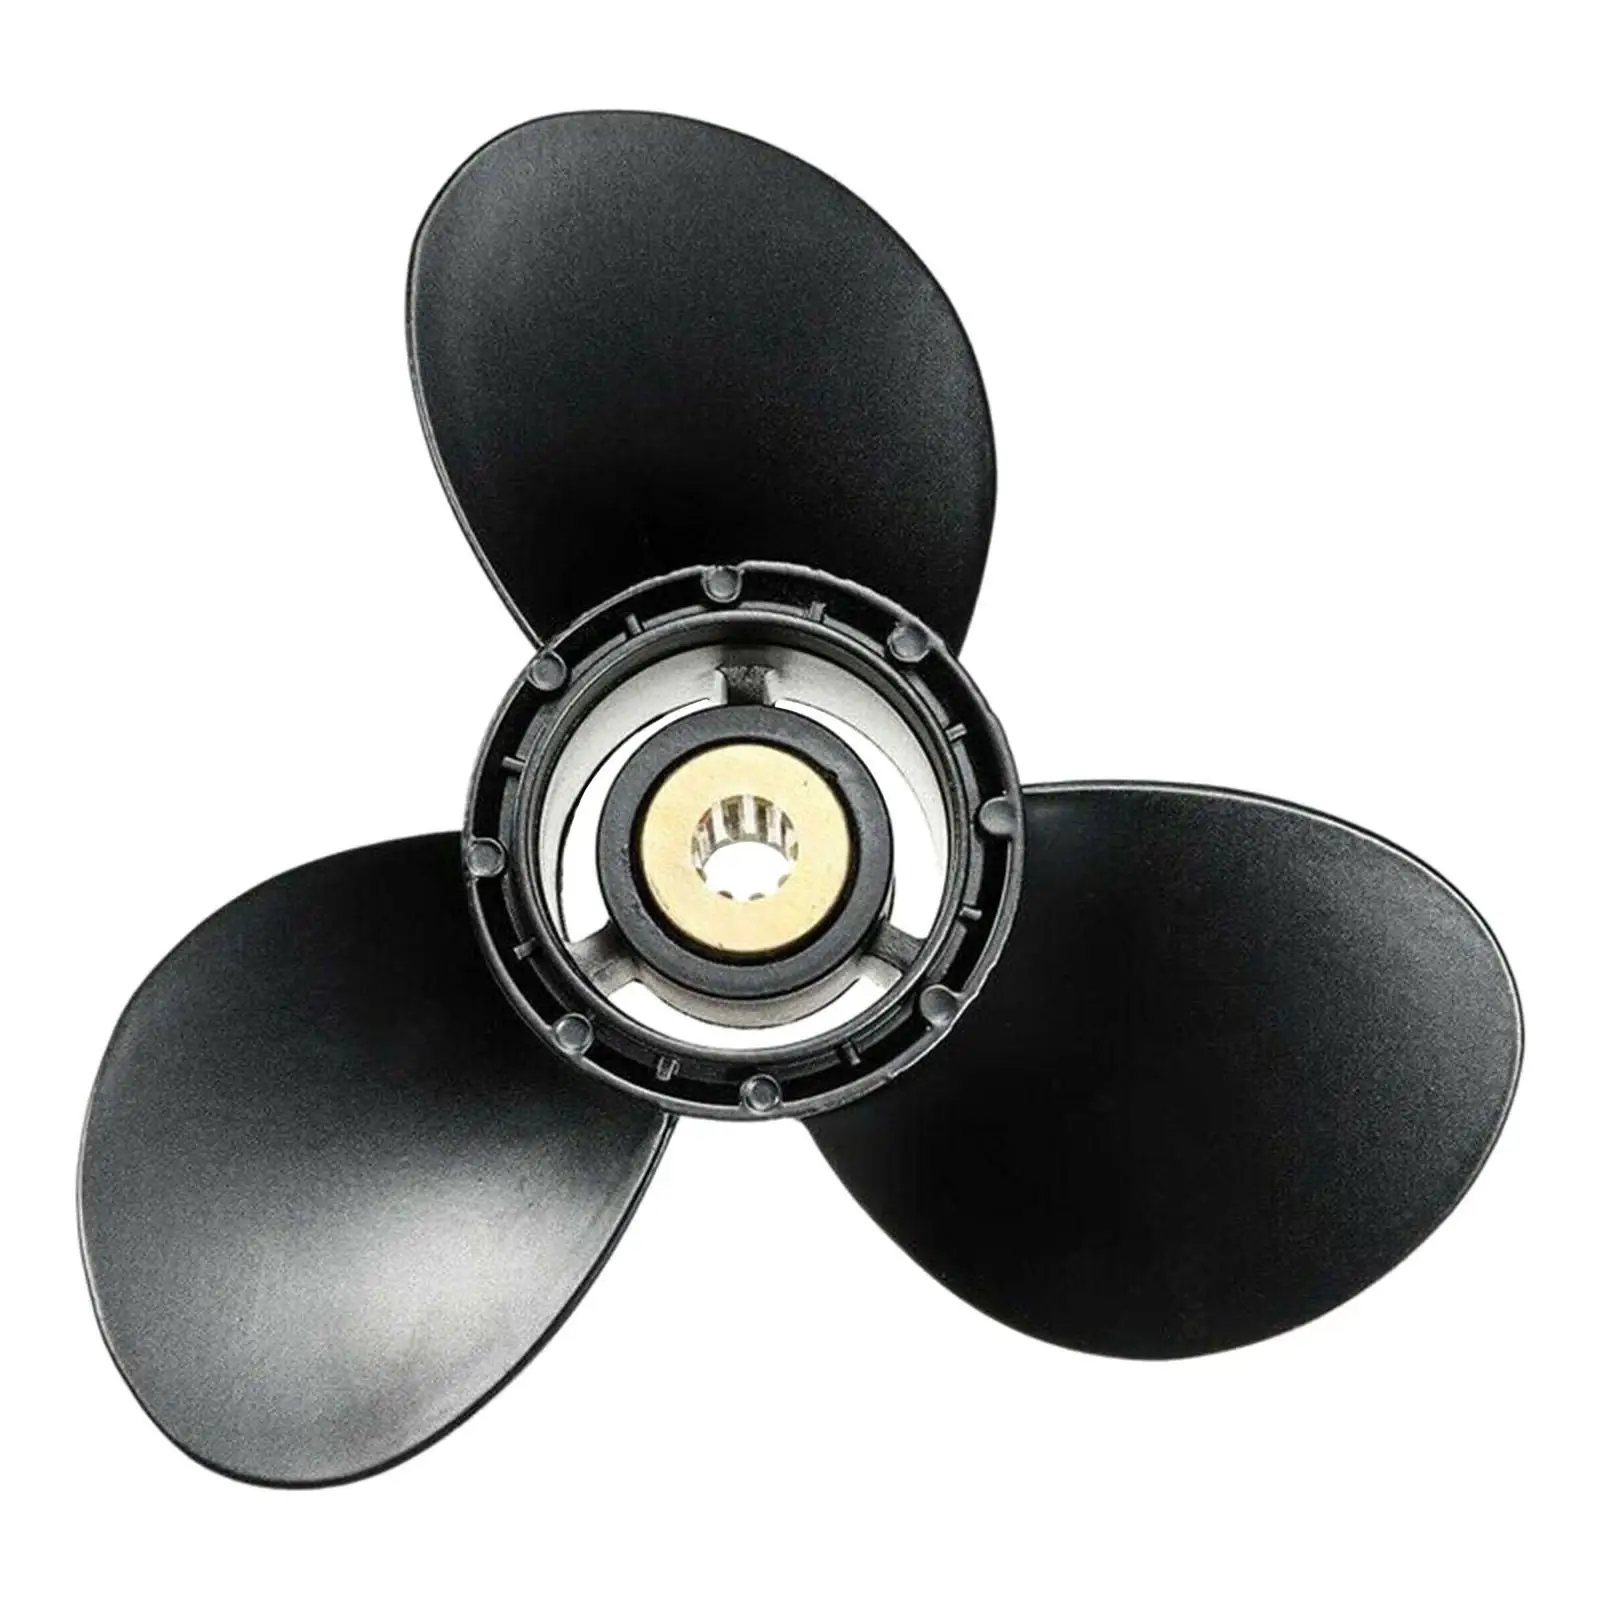 Outboard Propeller Replace Part Fit for Evinrude Johnson Outboard Engines